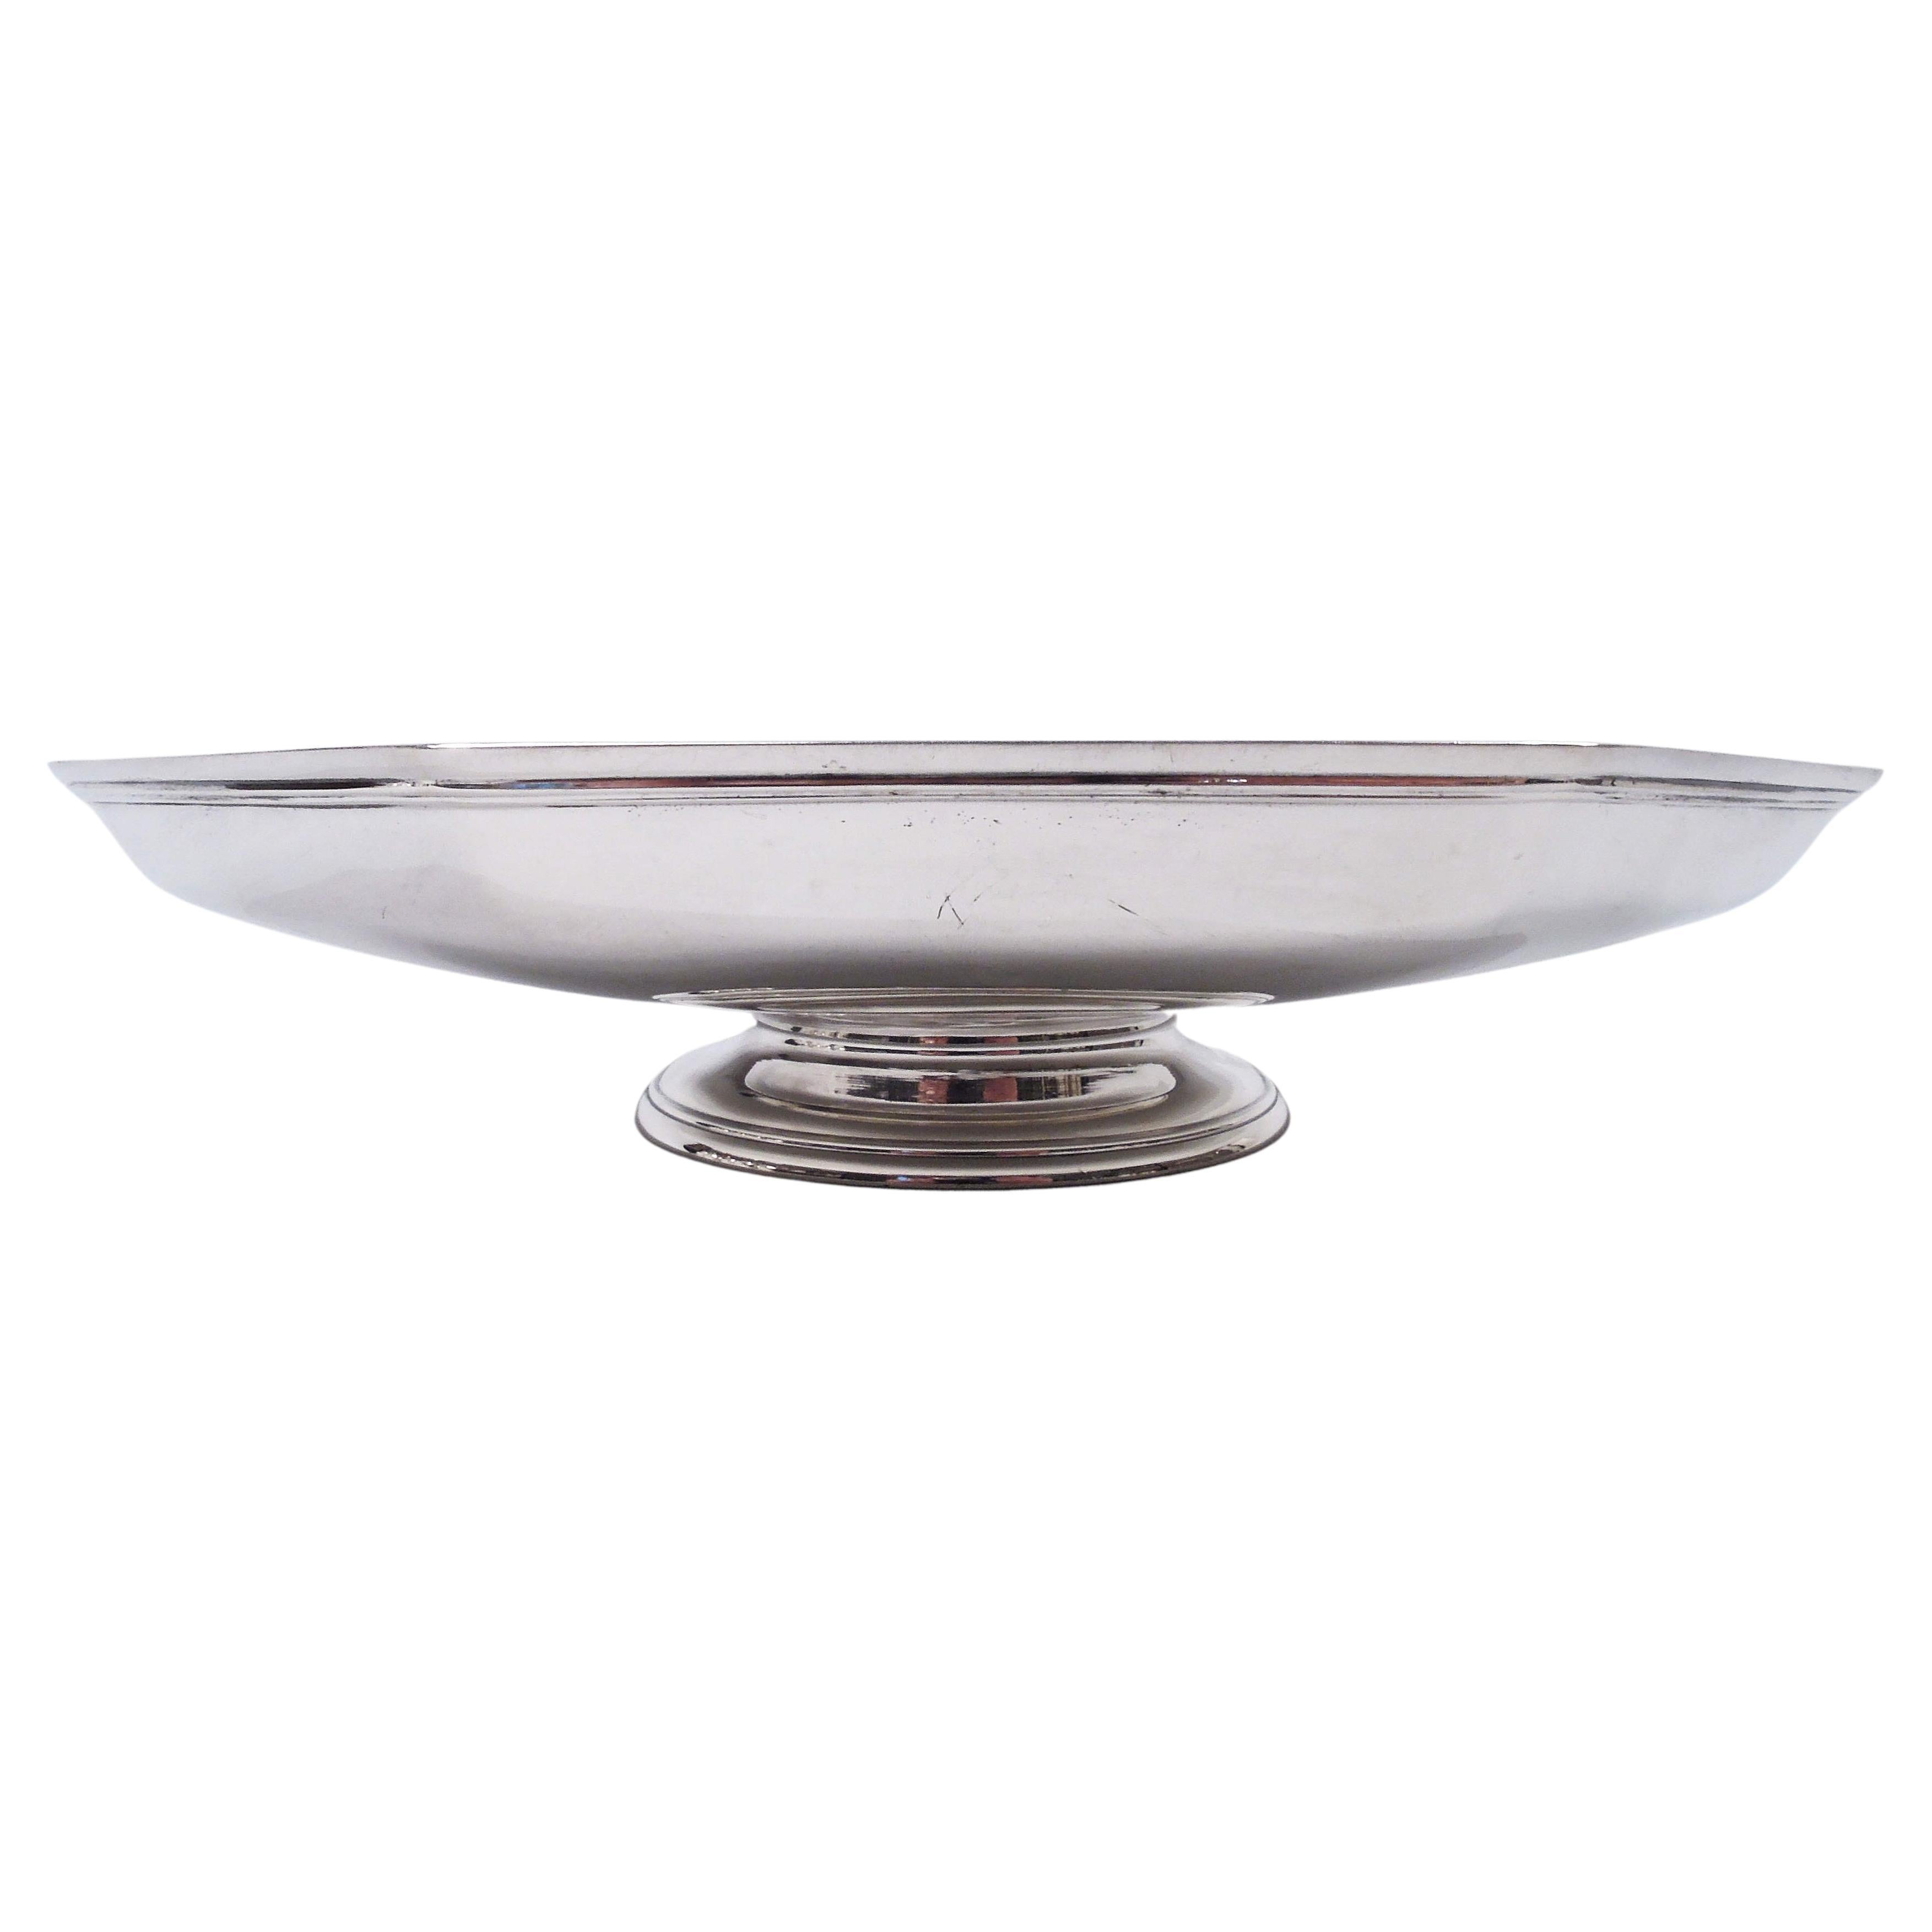 Tiffany American Art Deco Sterling Silver Footed Bowl C 1914 For Sale